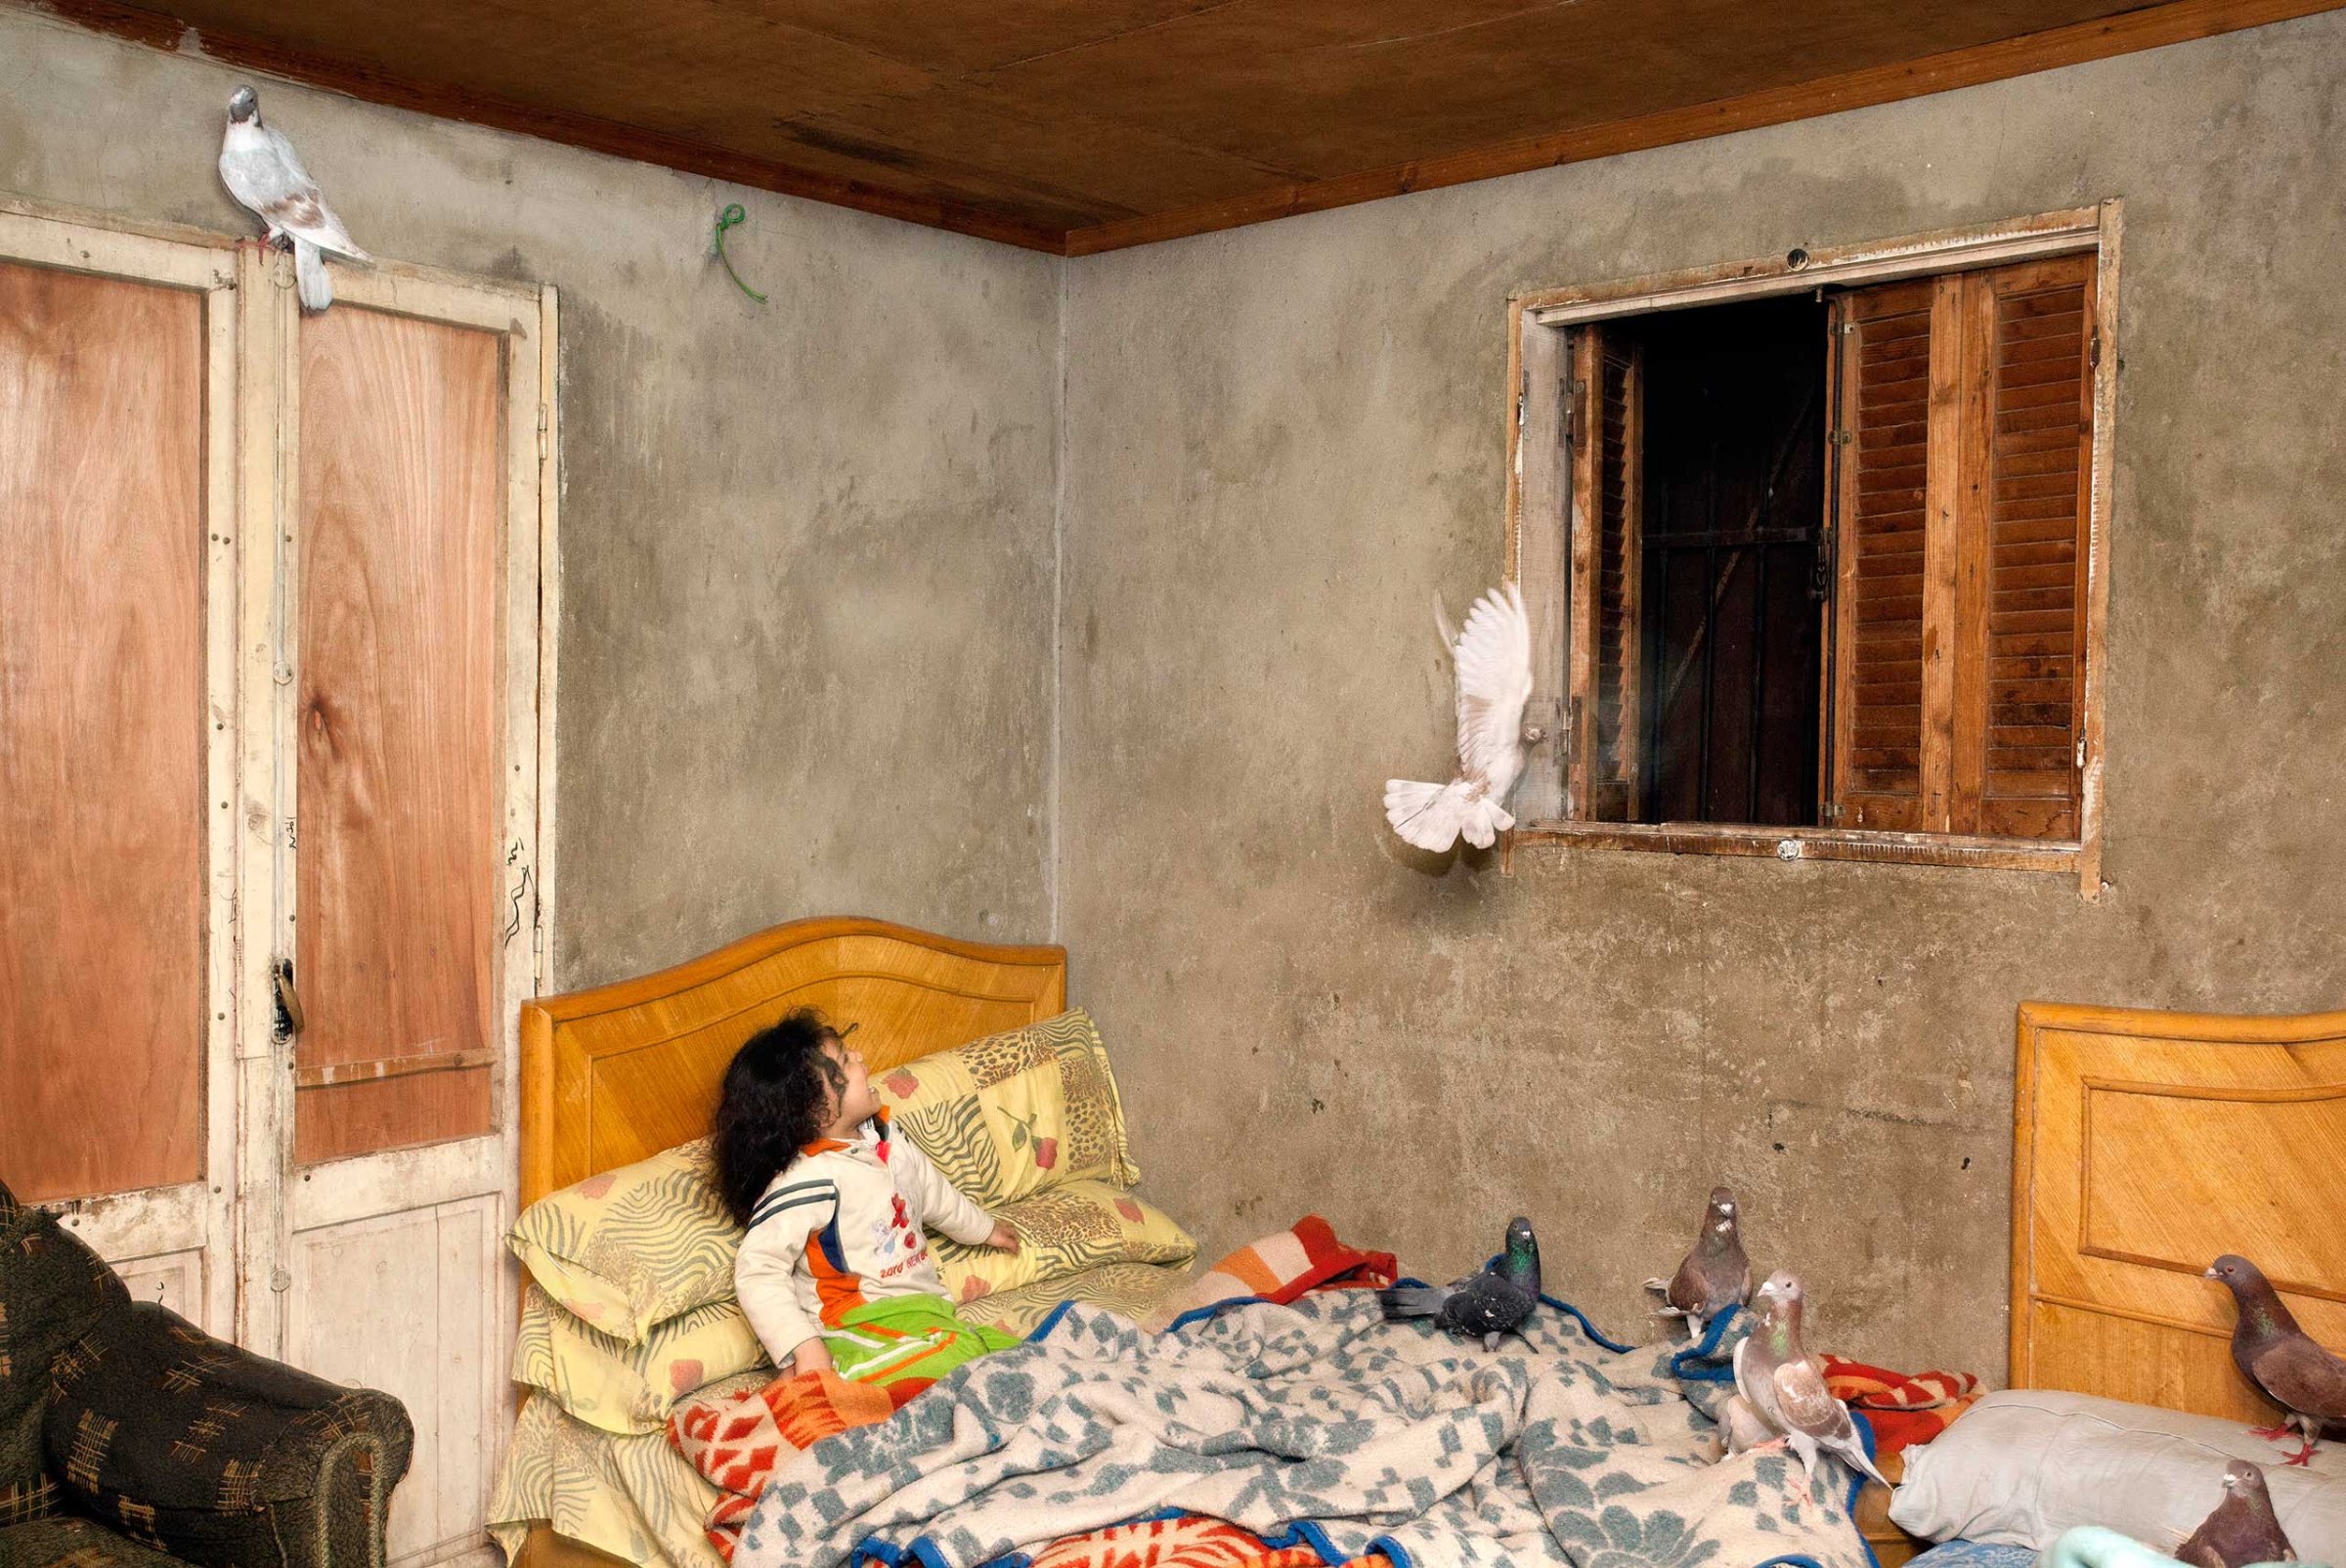 A young girl reacts to a pigeon flying around her room in Cairo, Egypt, March 2012.